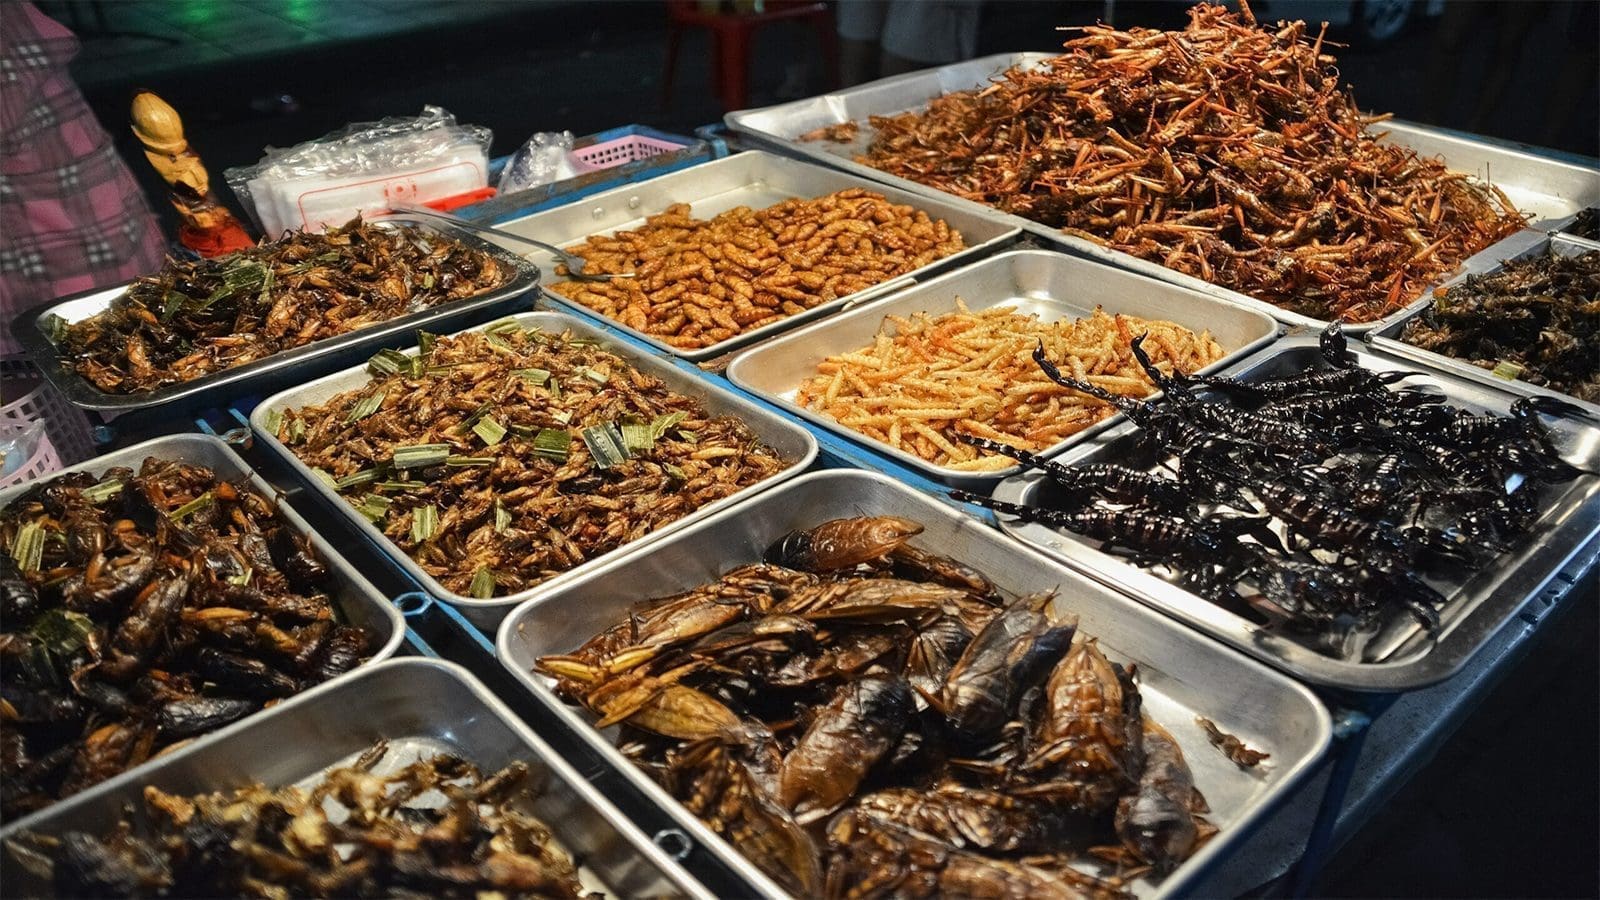 Study reveals potential hazards, fraud in edible insect supply chain